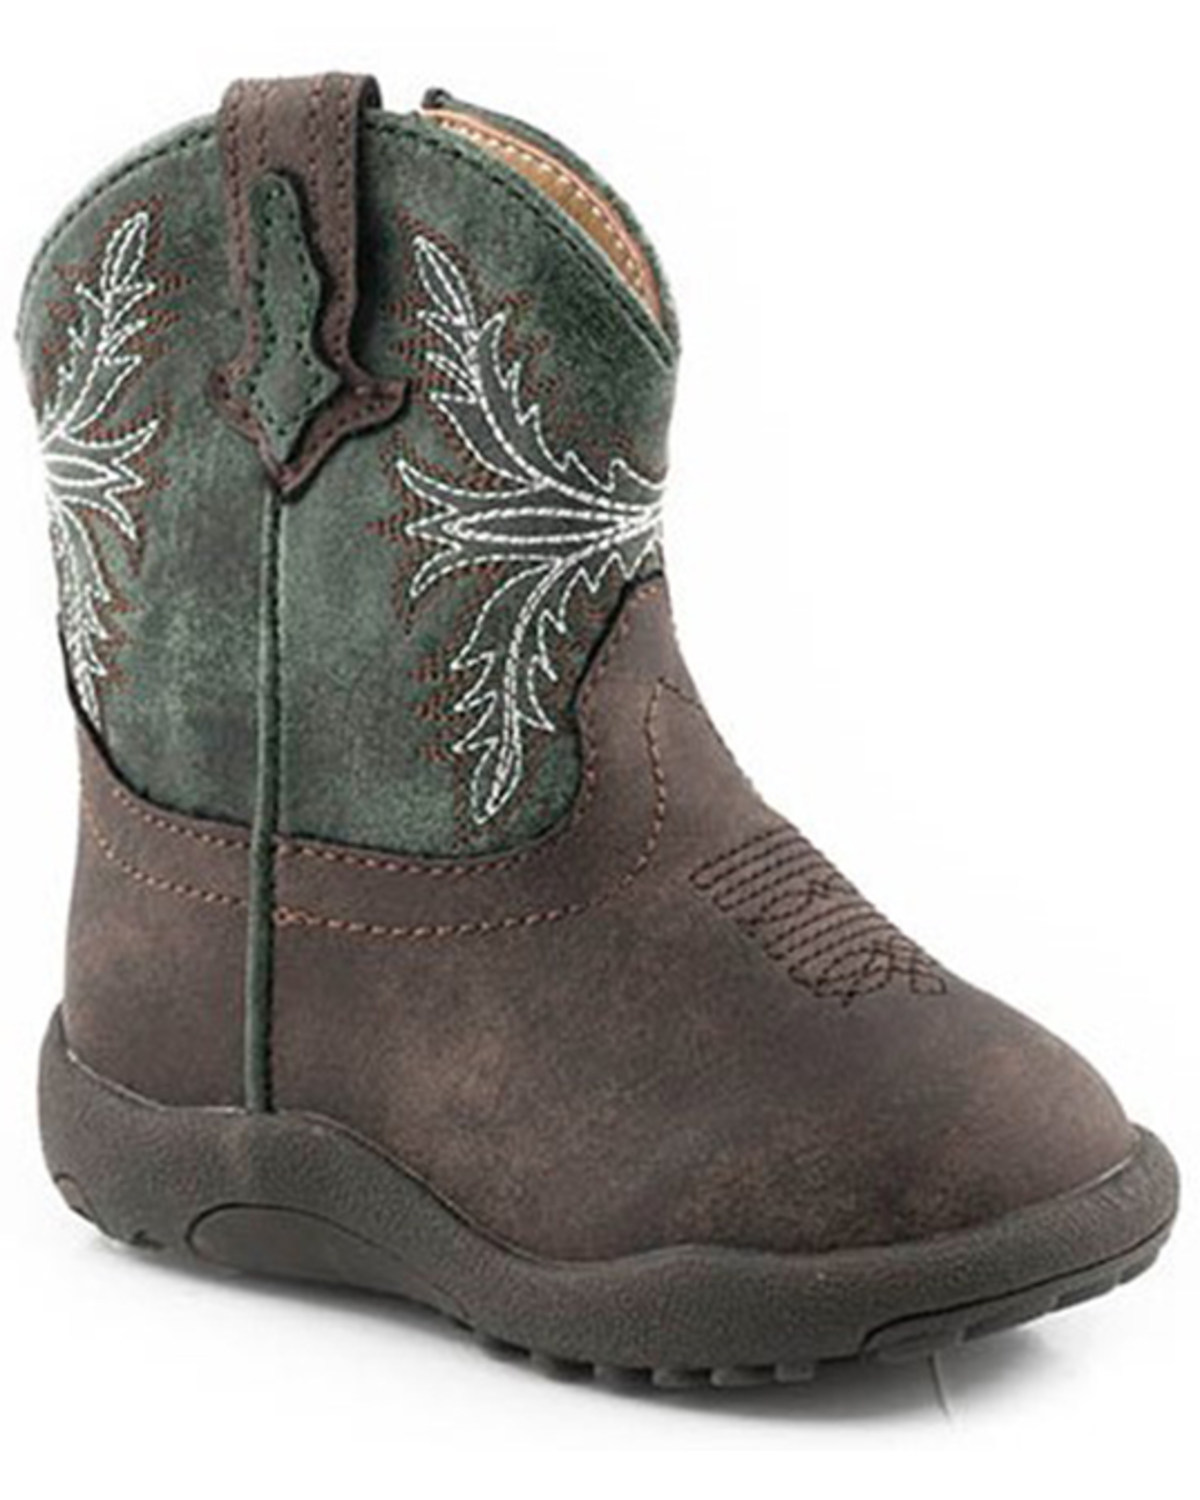 Roper Infant Boys' Jed Western Boots - Round Toe